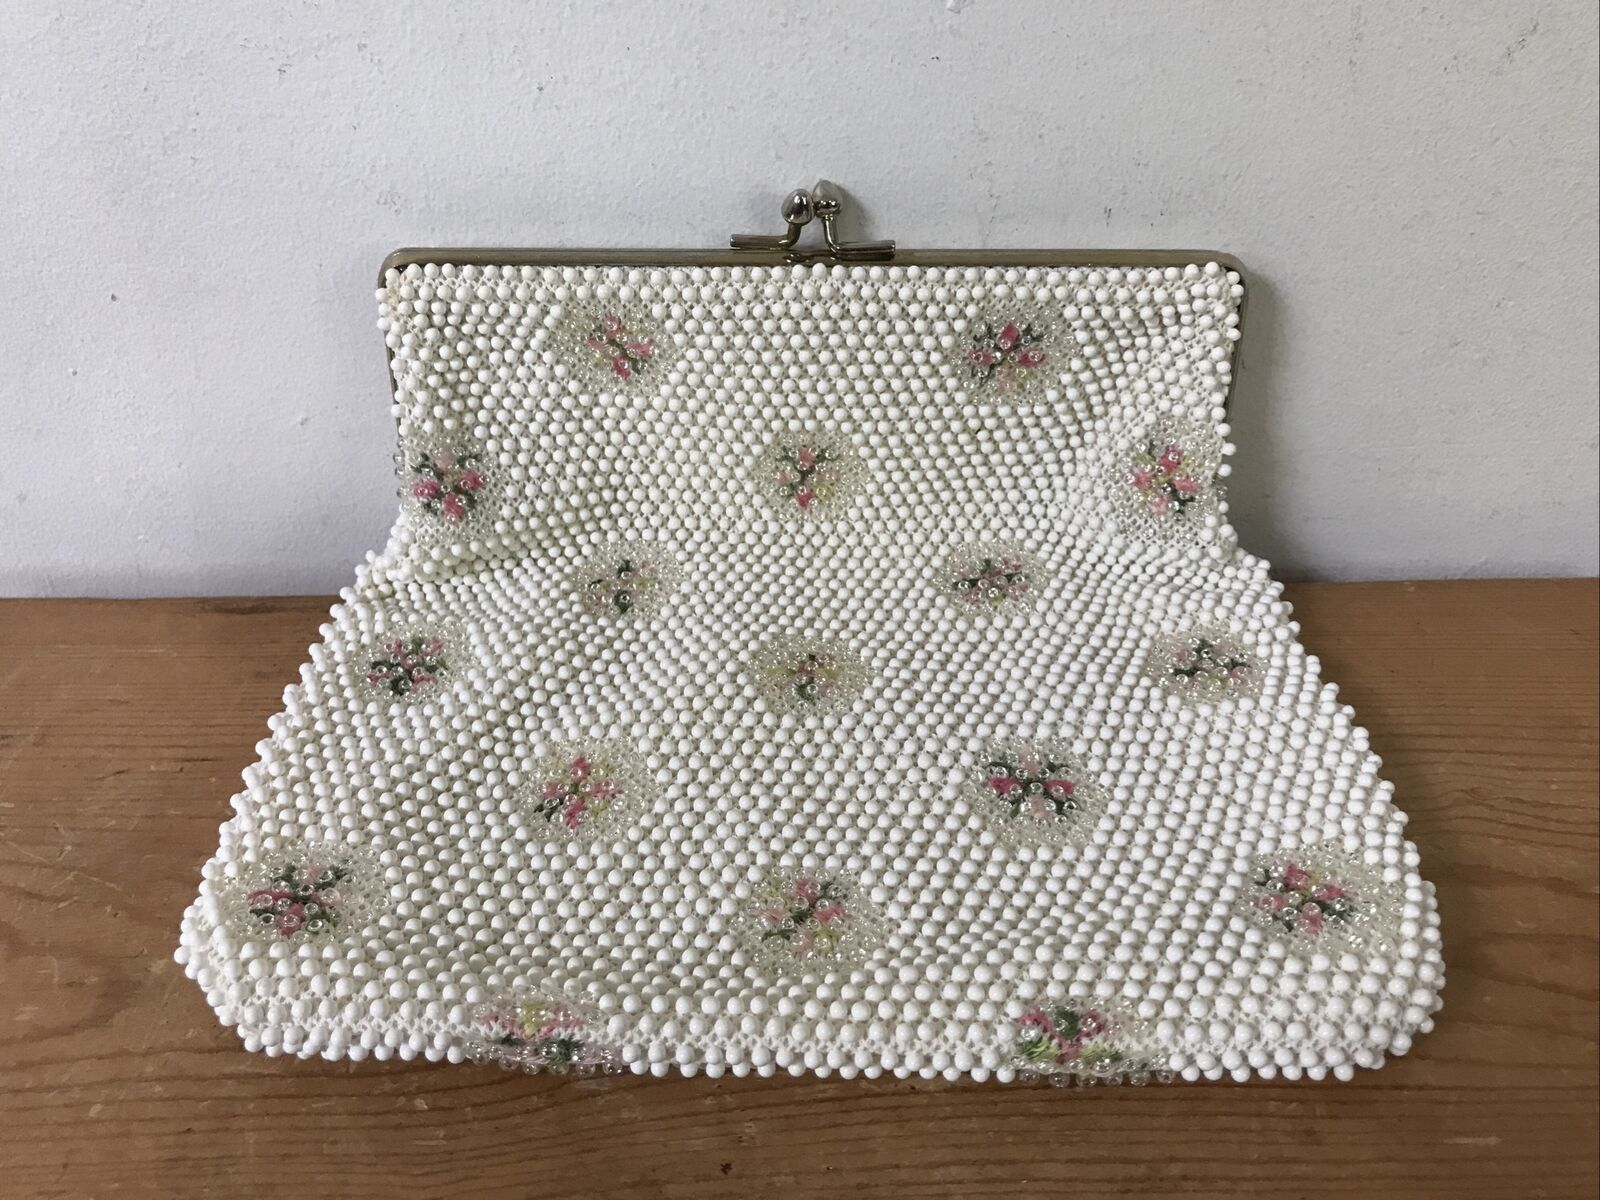 Primary image for Vintage Corde Bead Womens White Floral Formal Beaded Clutch Purse Handbag Bag